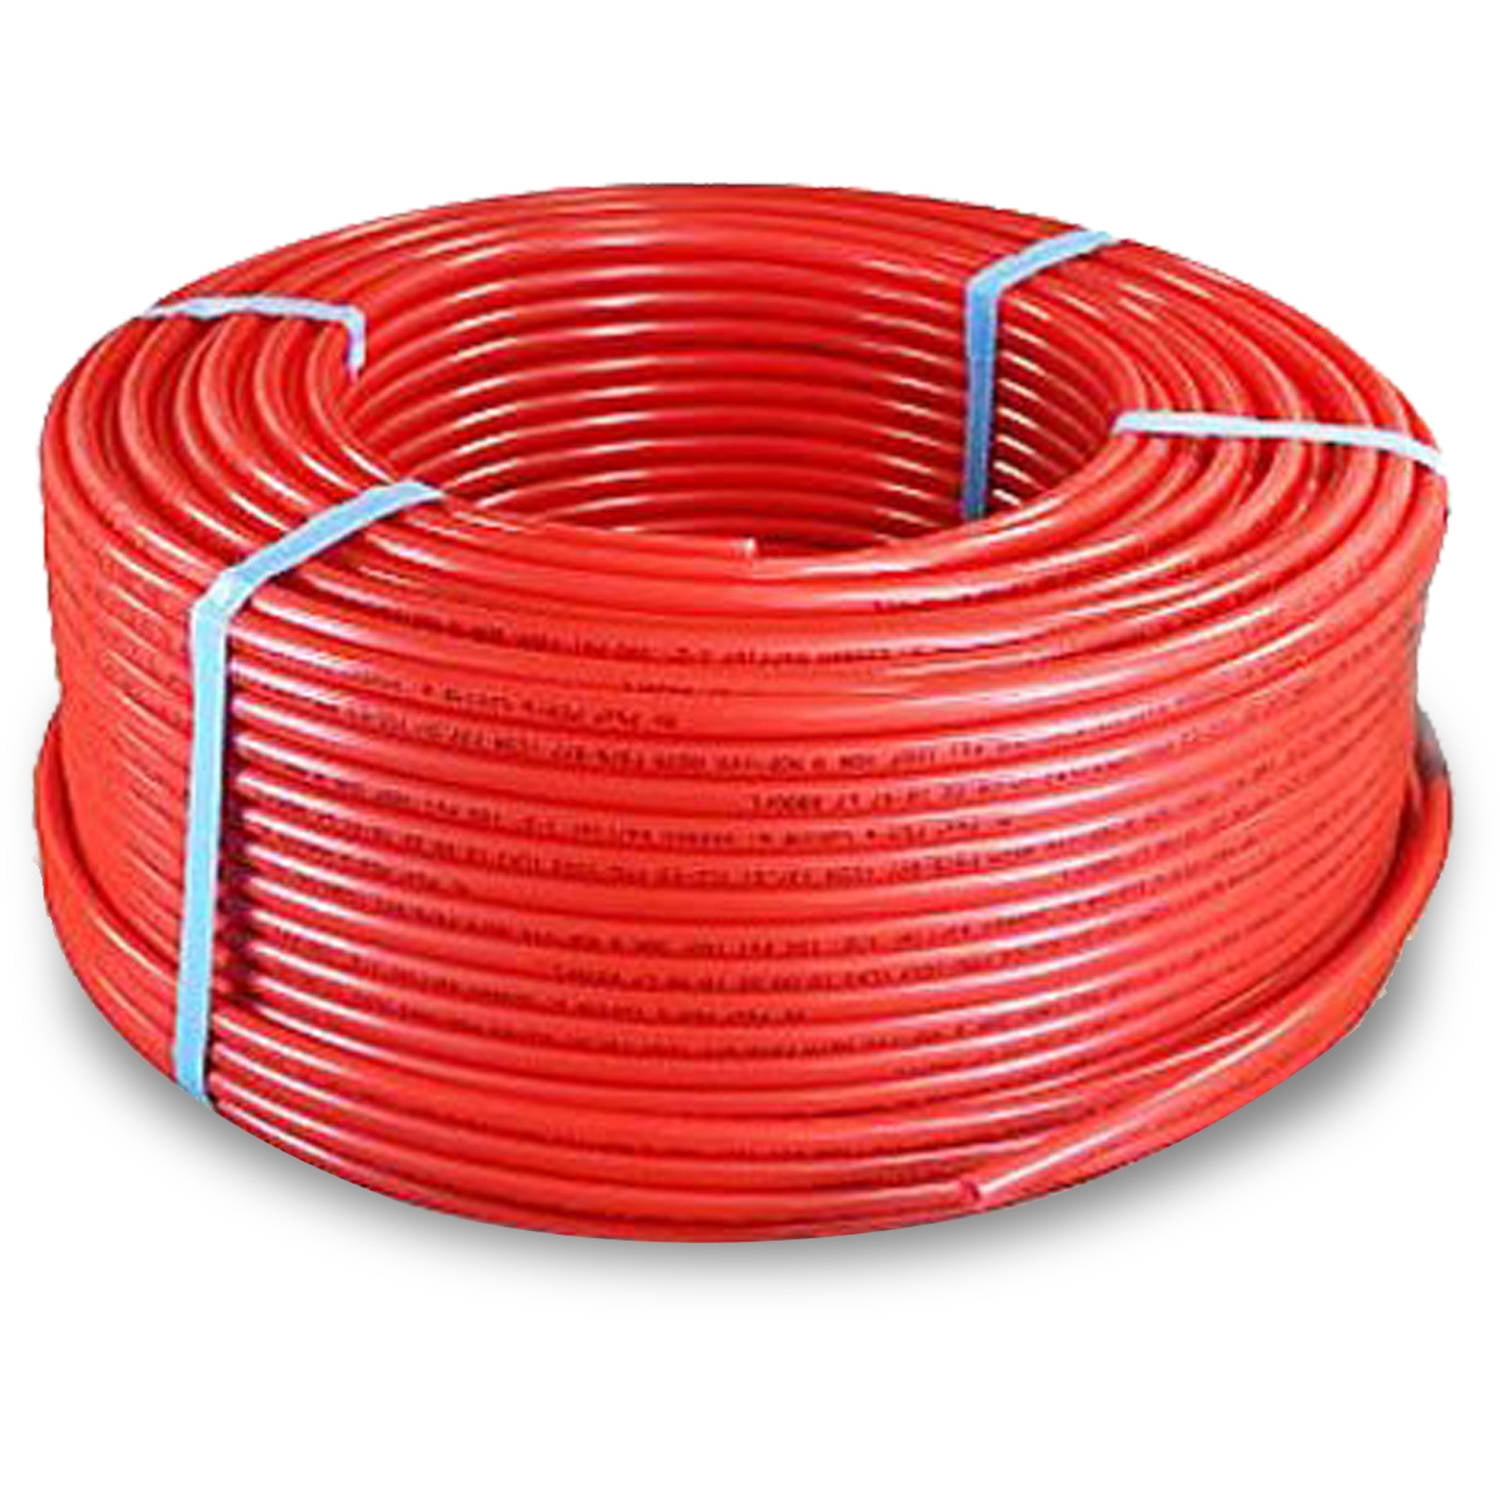 1000' 1/2" Oxygen Barrier PEX Tubing For Heating and Plumbing Radiant Heat Best 